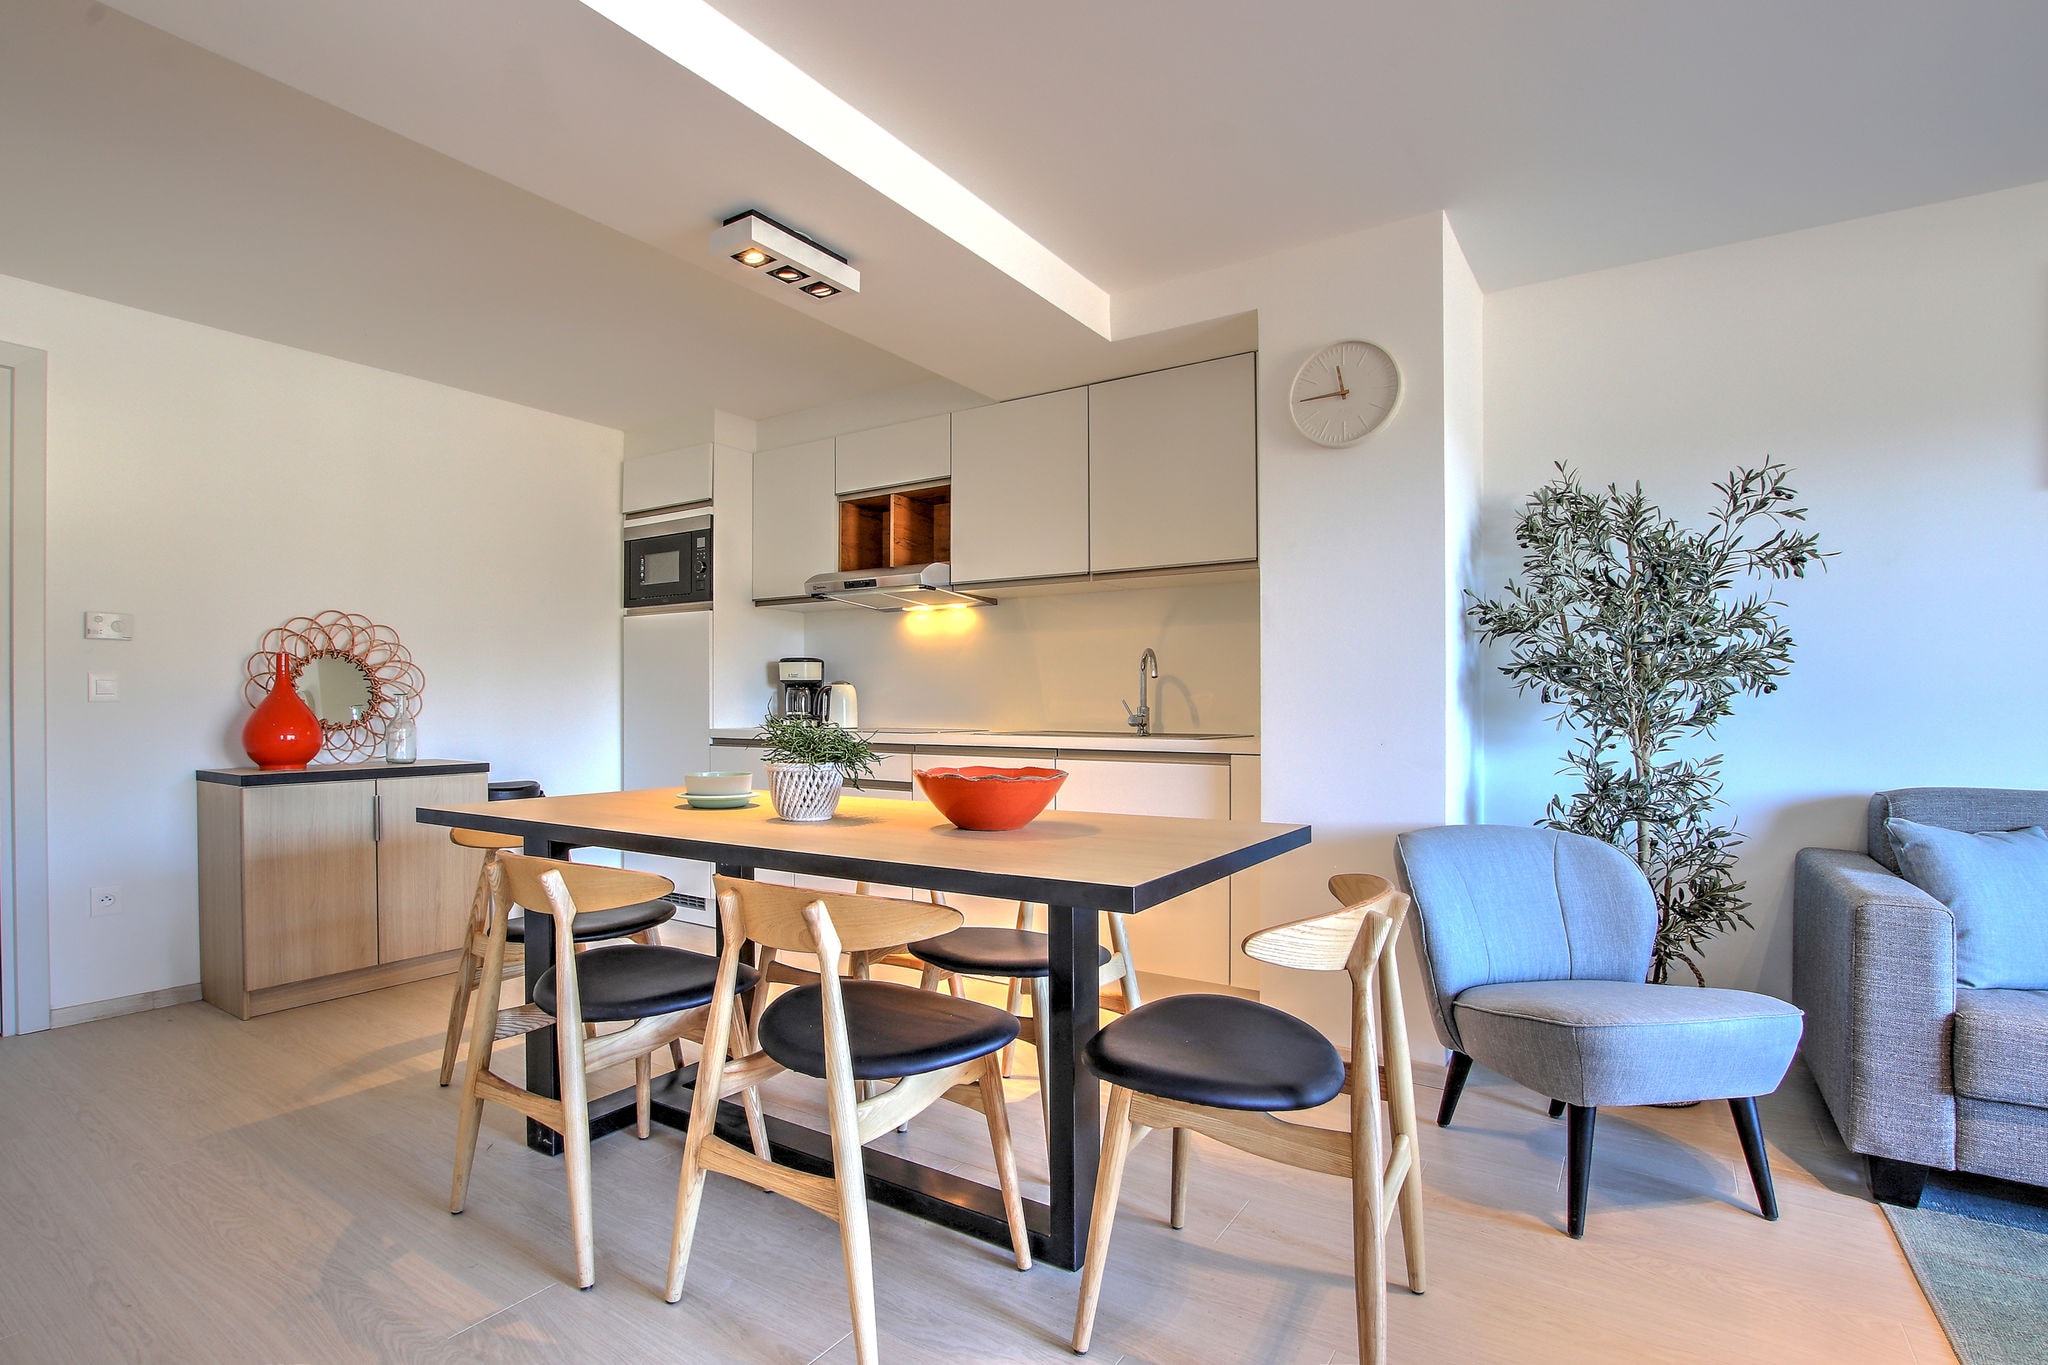 Excellent apartments in a great location on the Côte d'Azur